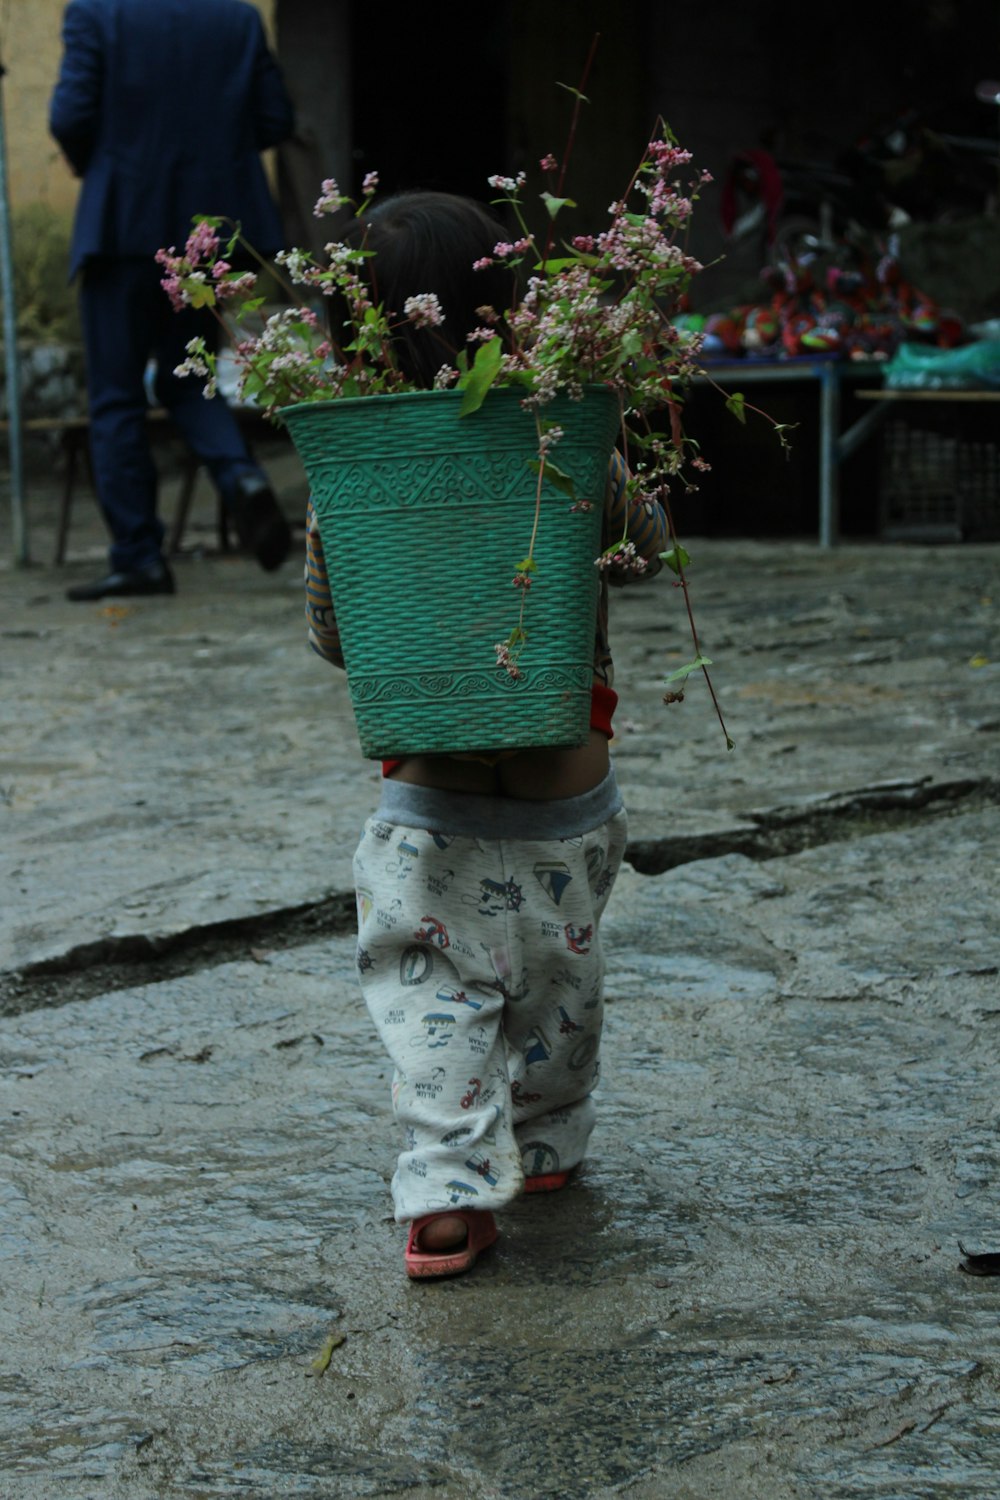 a child carrying a basket of flowers on his head